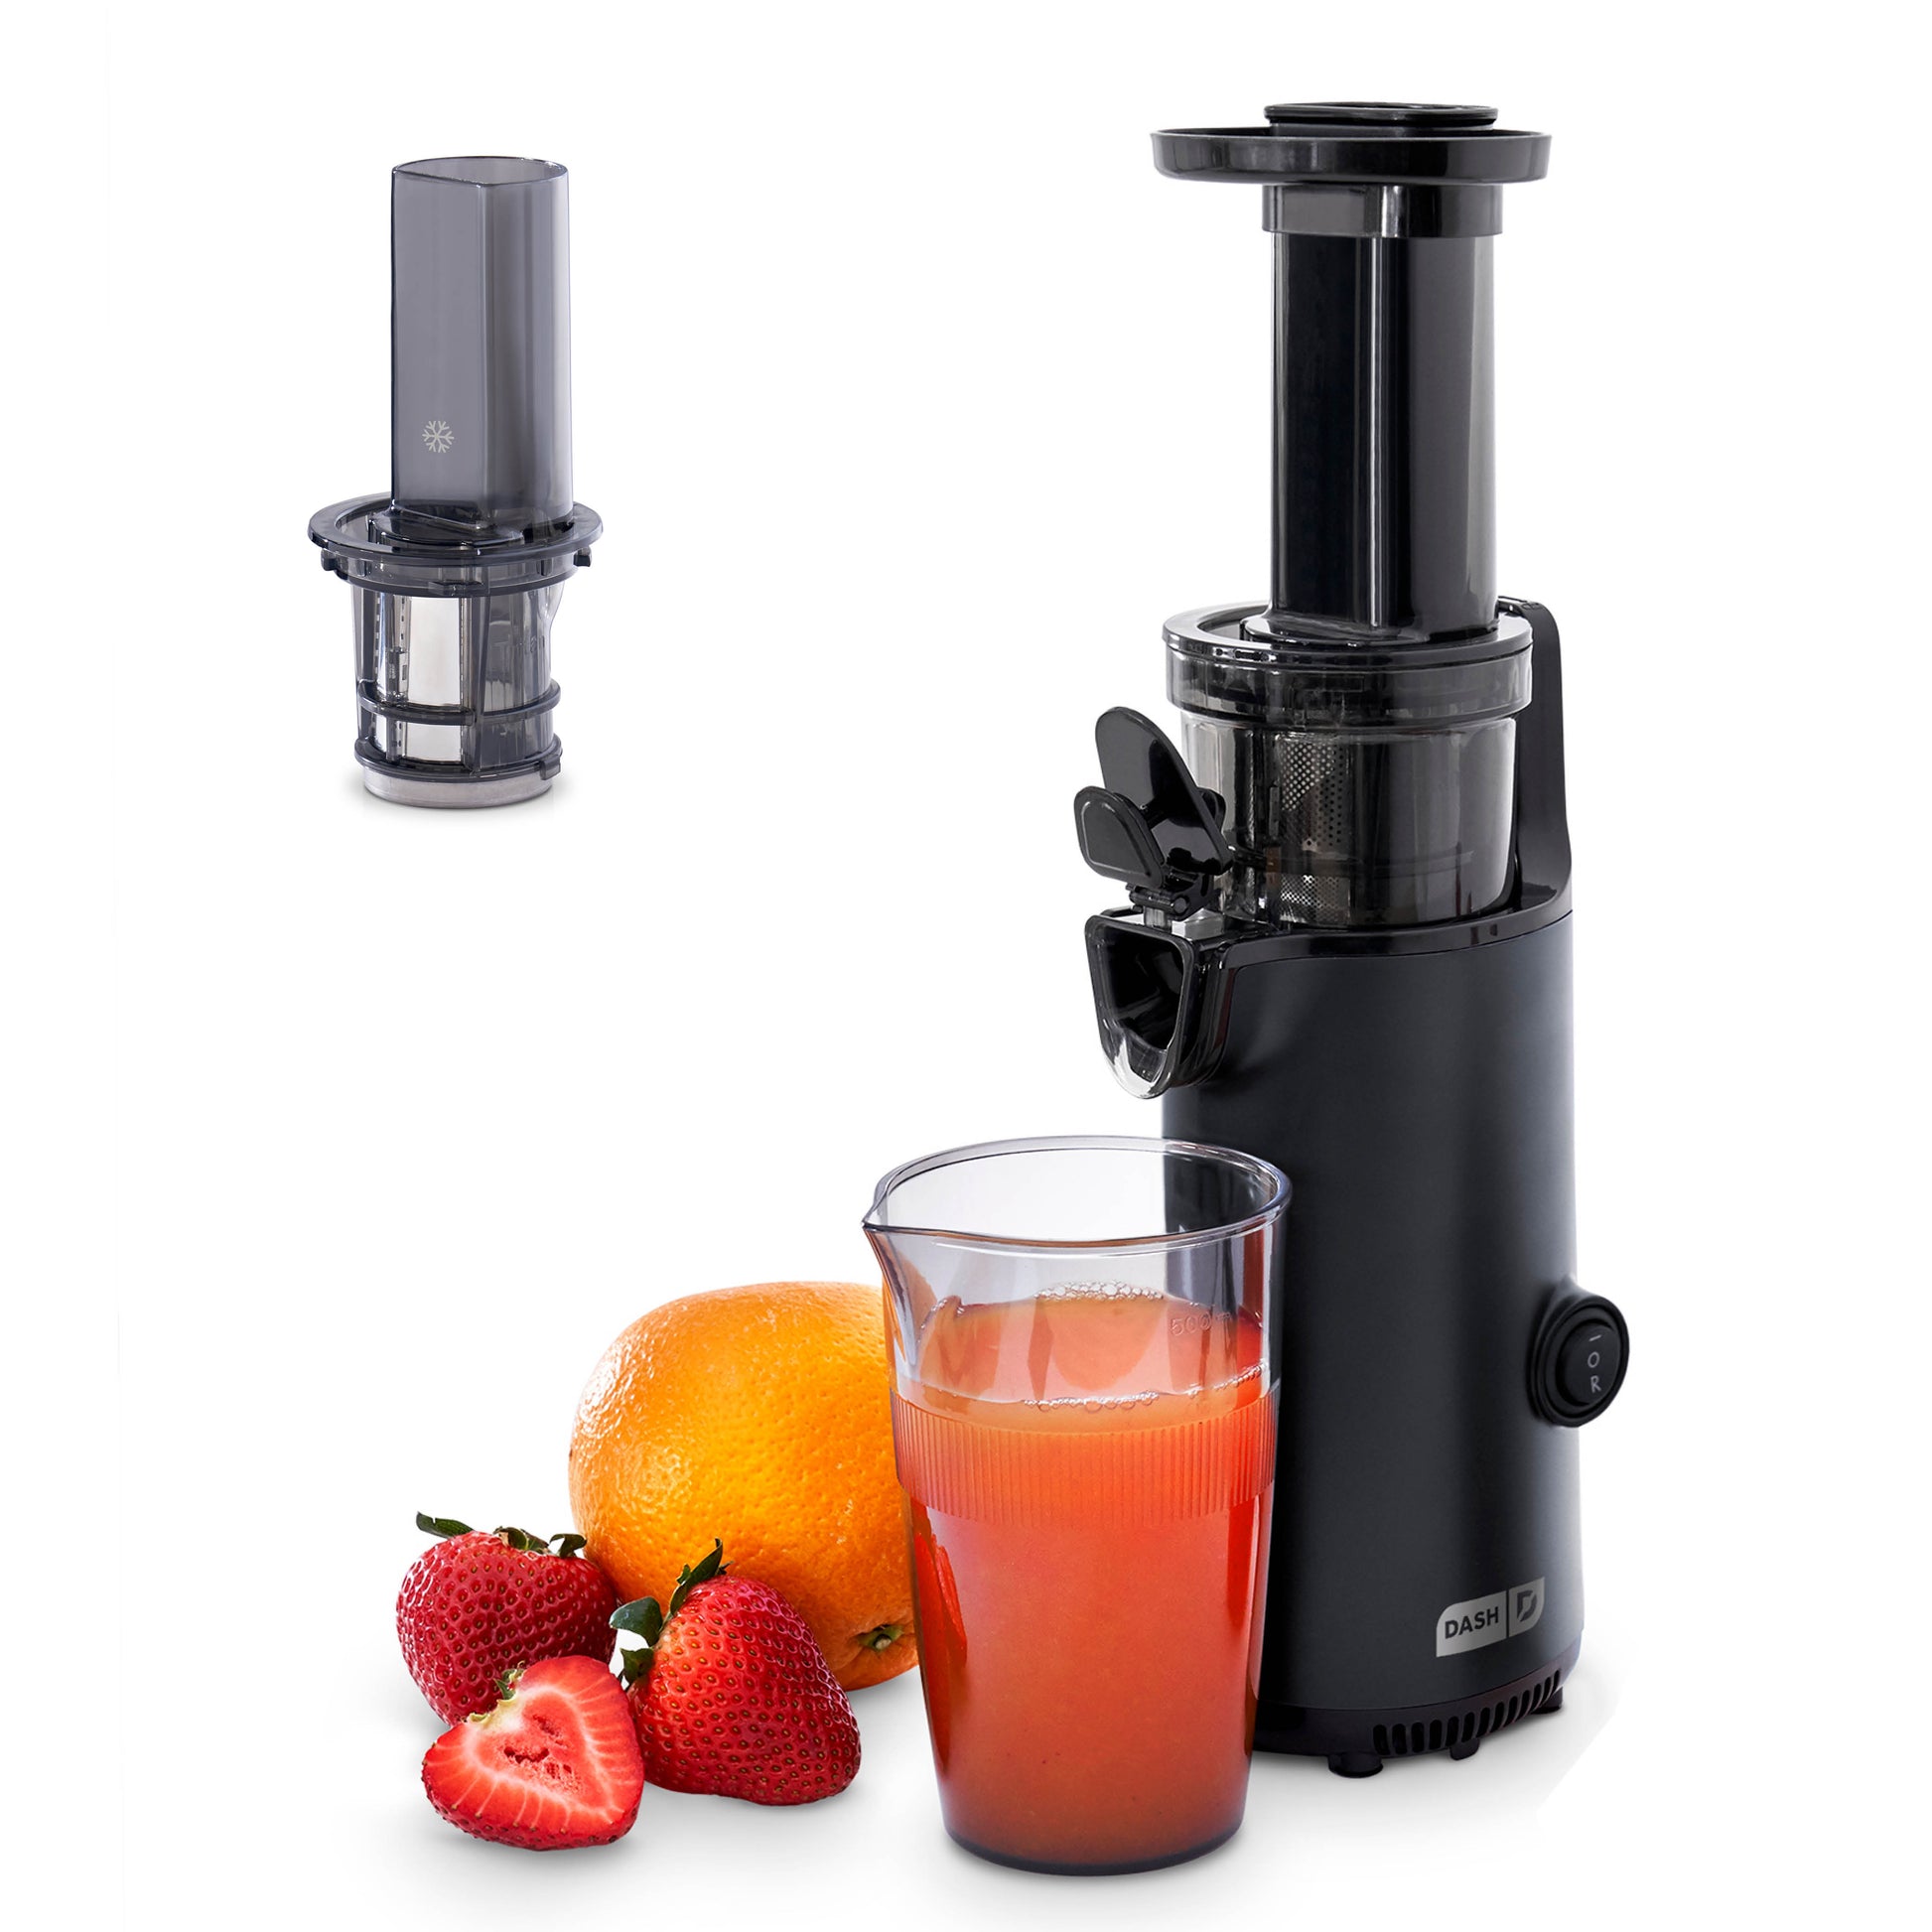 Dash deals: Save on mixers, juicers, blenders and more today